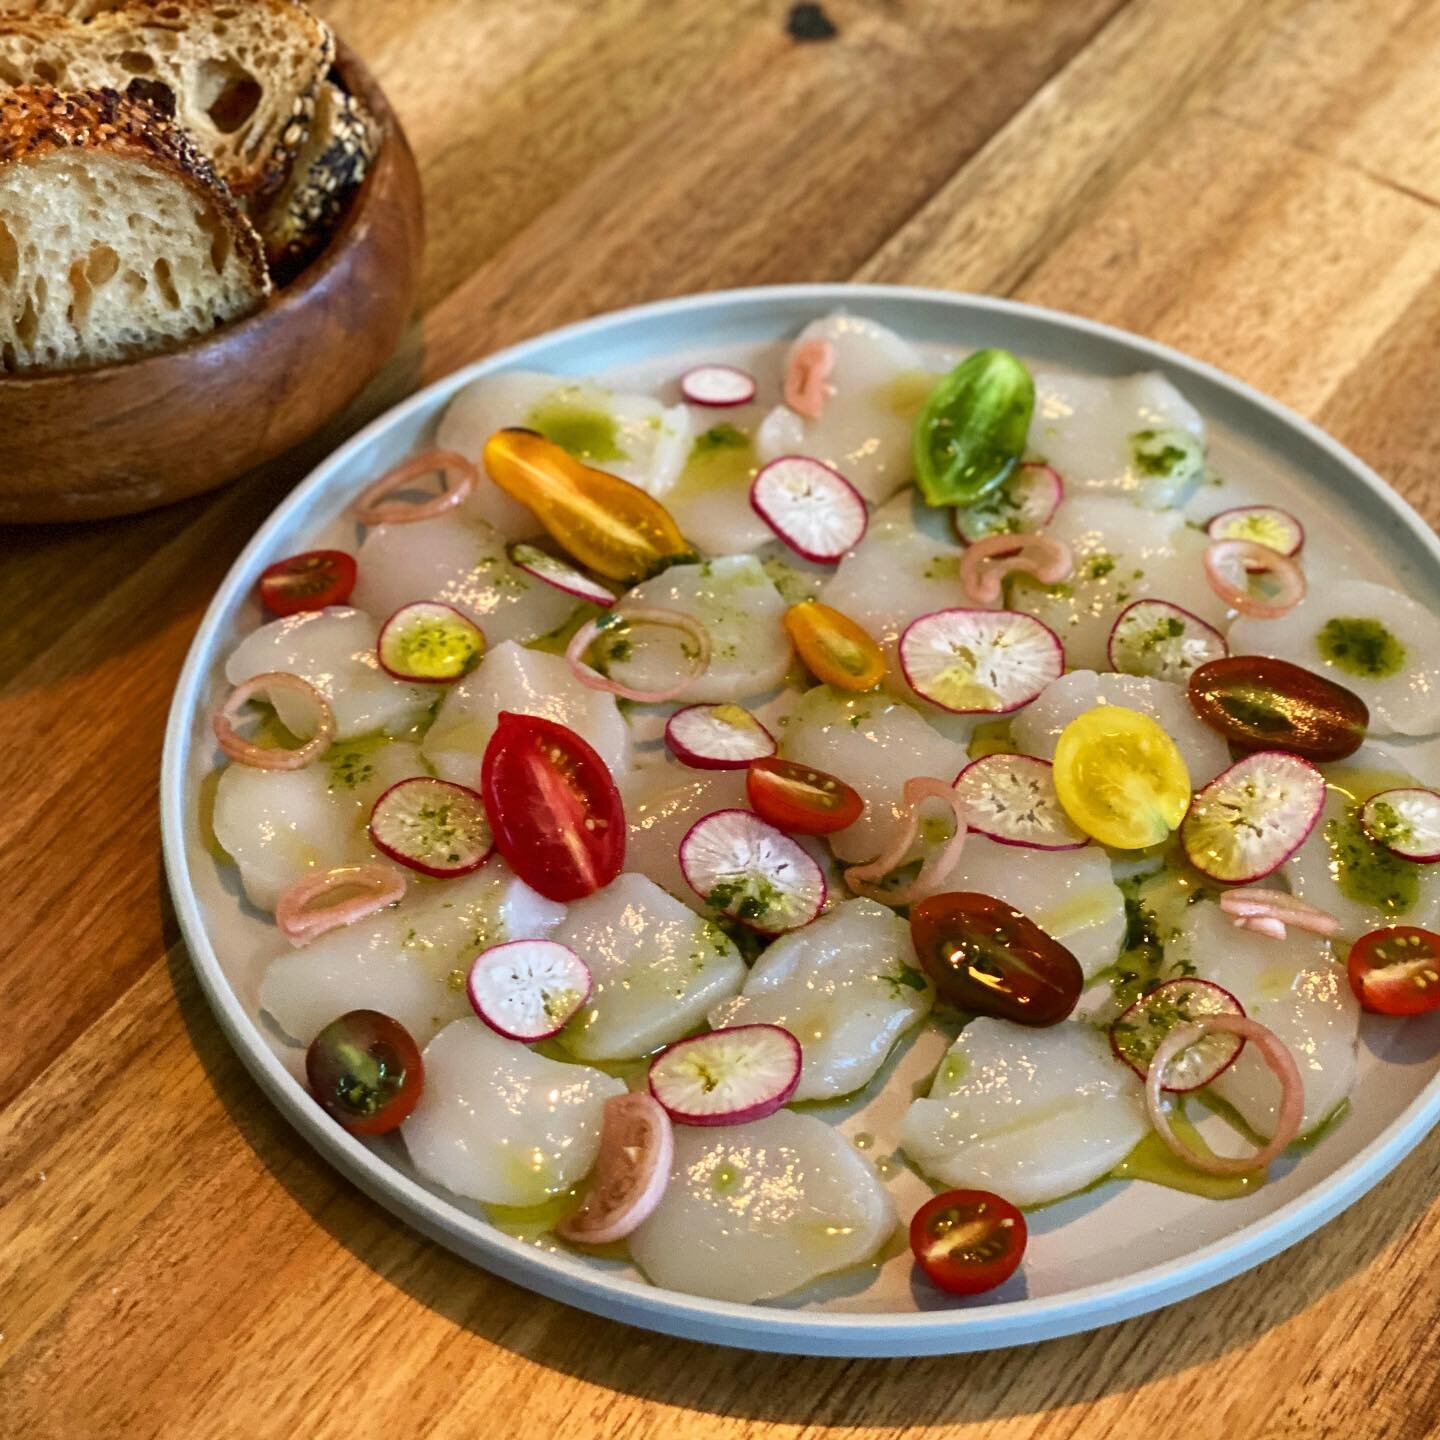 made a scallop carpaccio like an asshole. dry sea scallops sliced with some cherry tomatoes, radishes, quick pickled shallots, olive oil, lime, cilantro, sea salt. i made too much, a few pieces a person is enough for a dish like this. &ldquo;you live